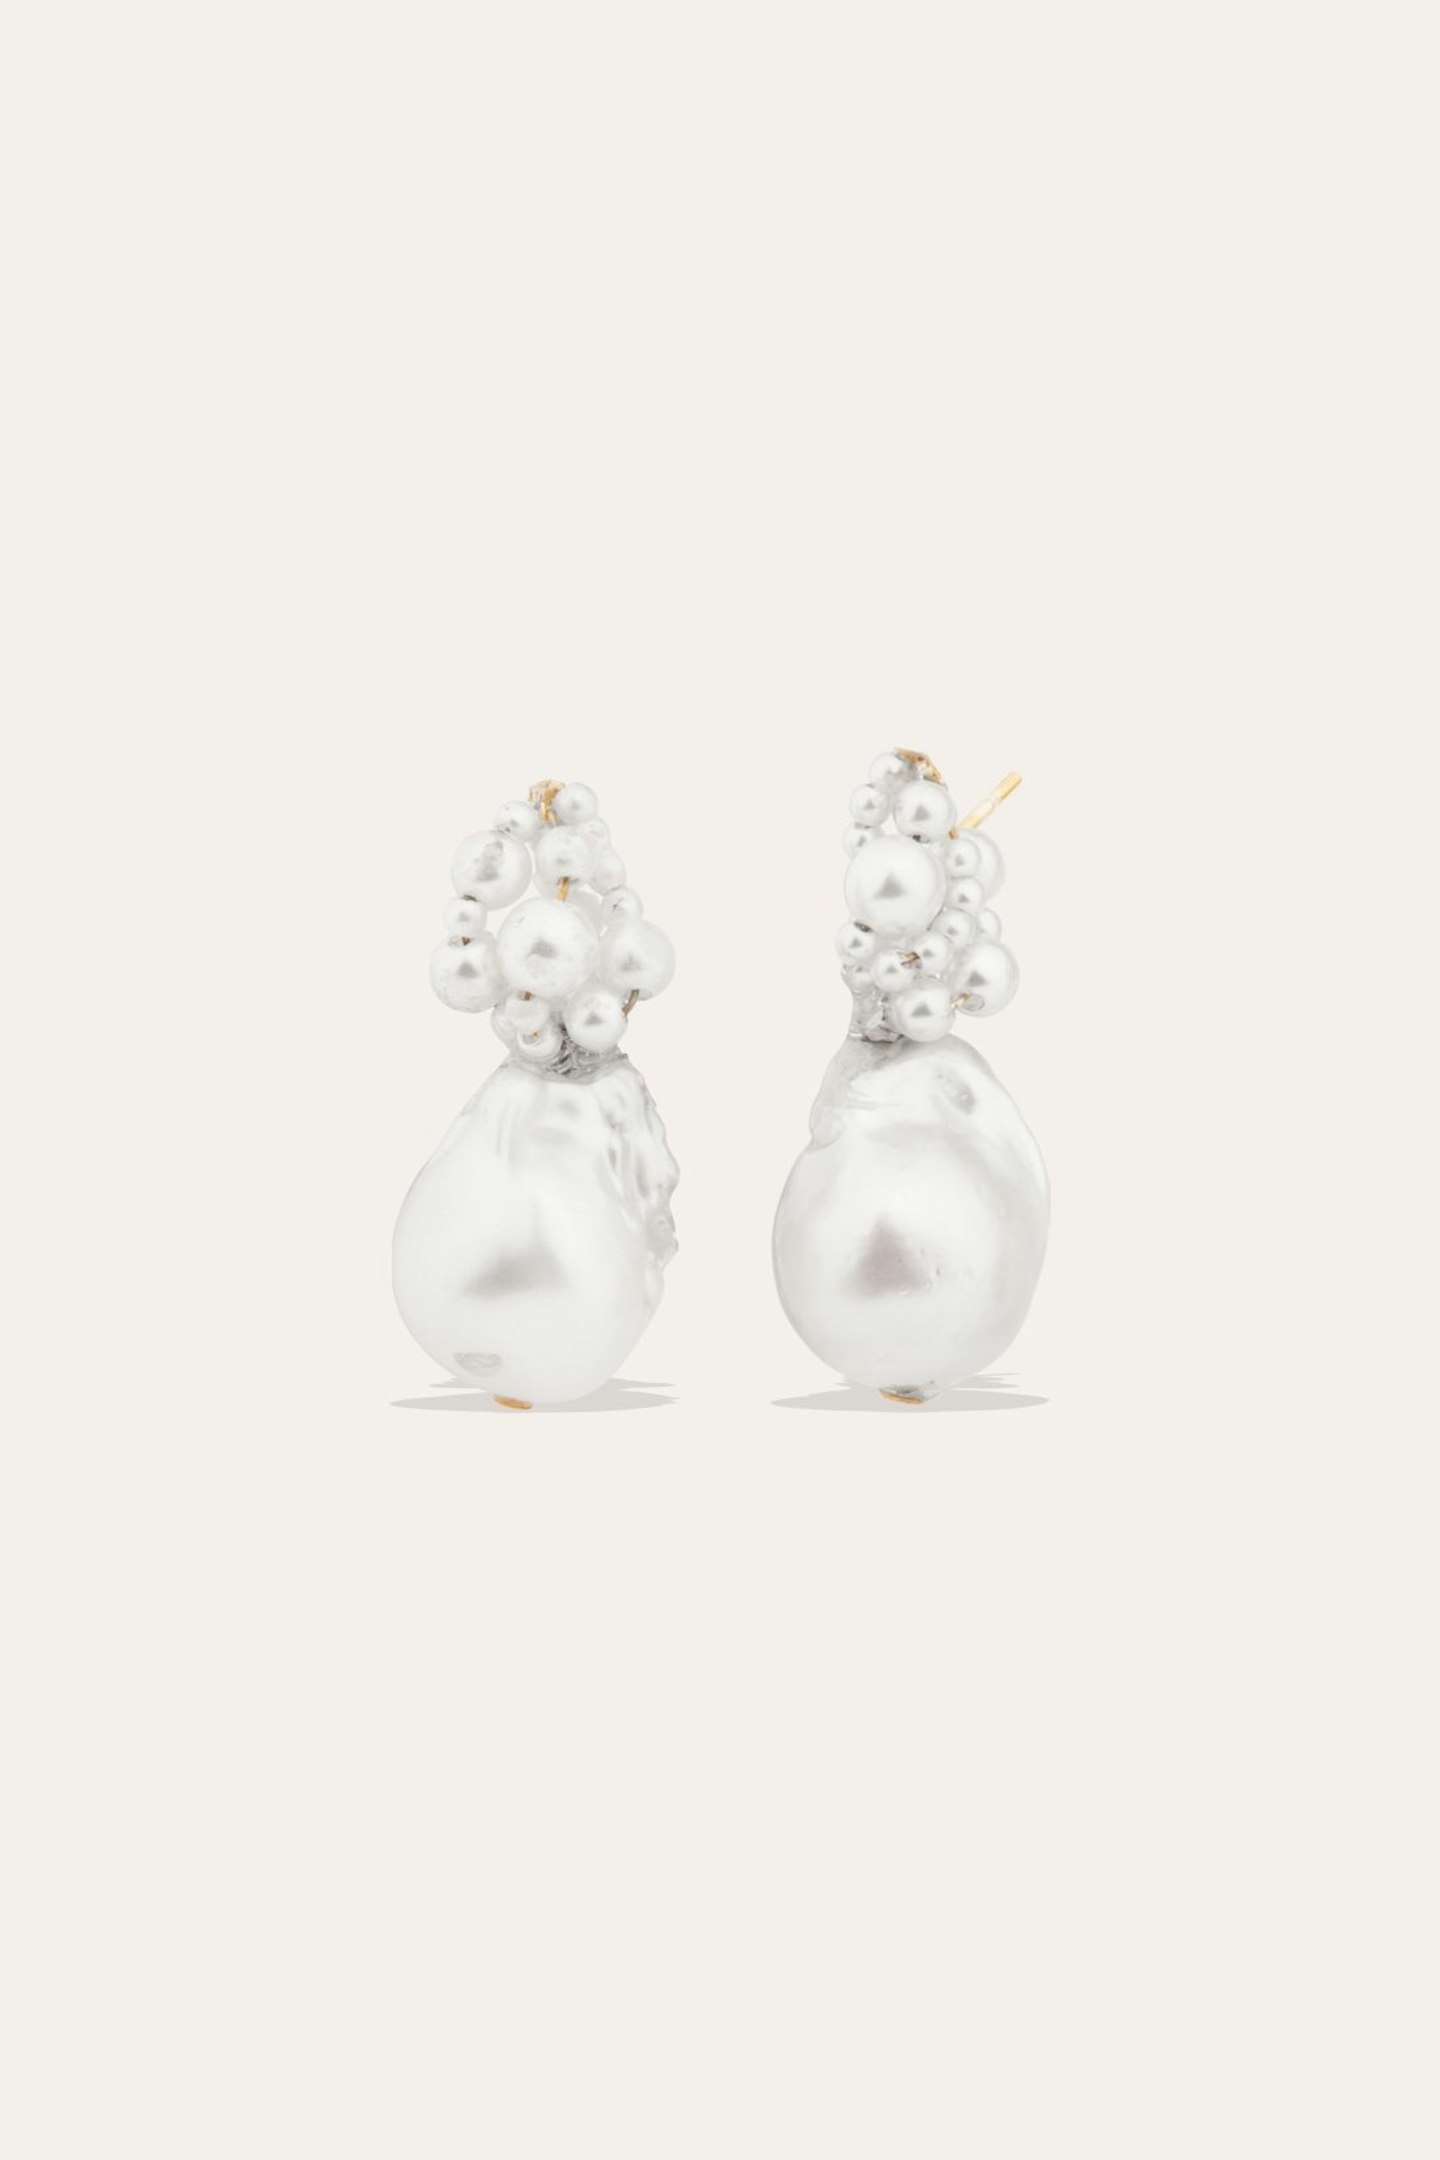 Completedworks, Tra-La-La Gold Vermeil And Pearl Earrings, £235